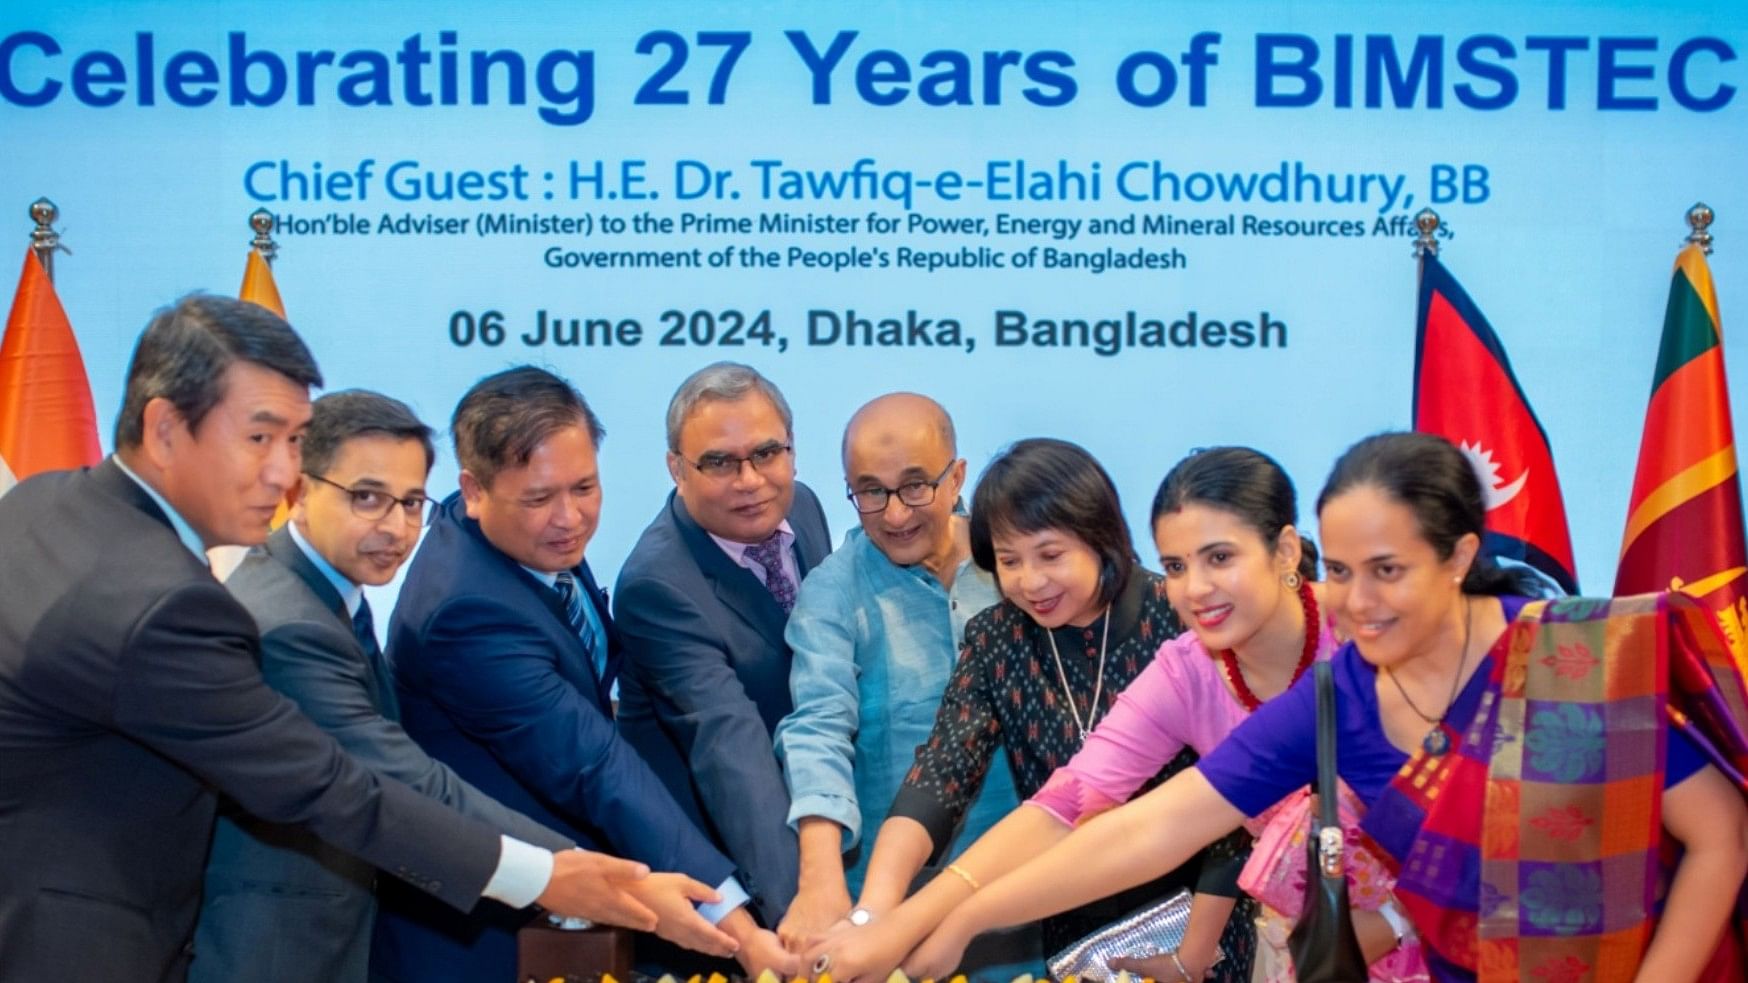 <div class="paragraphs"><p>The BIMSTEC Secretariat hosted a reception on 6 June 2024 to celebrate the foundation of BIMSTEC with the signing of the Bangkok Declaration, on 6 June 1997.</p></div>